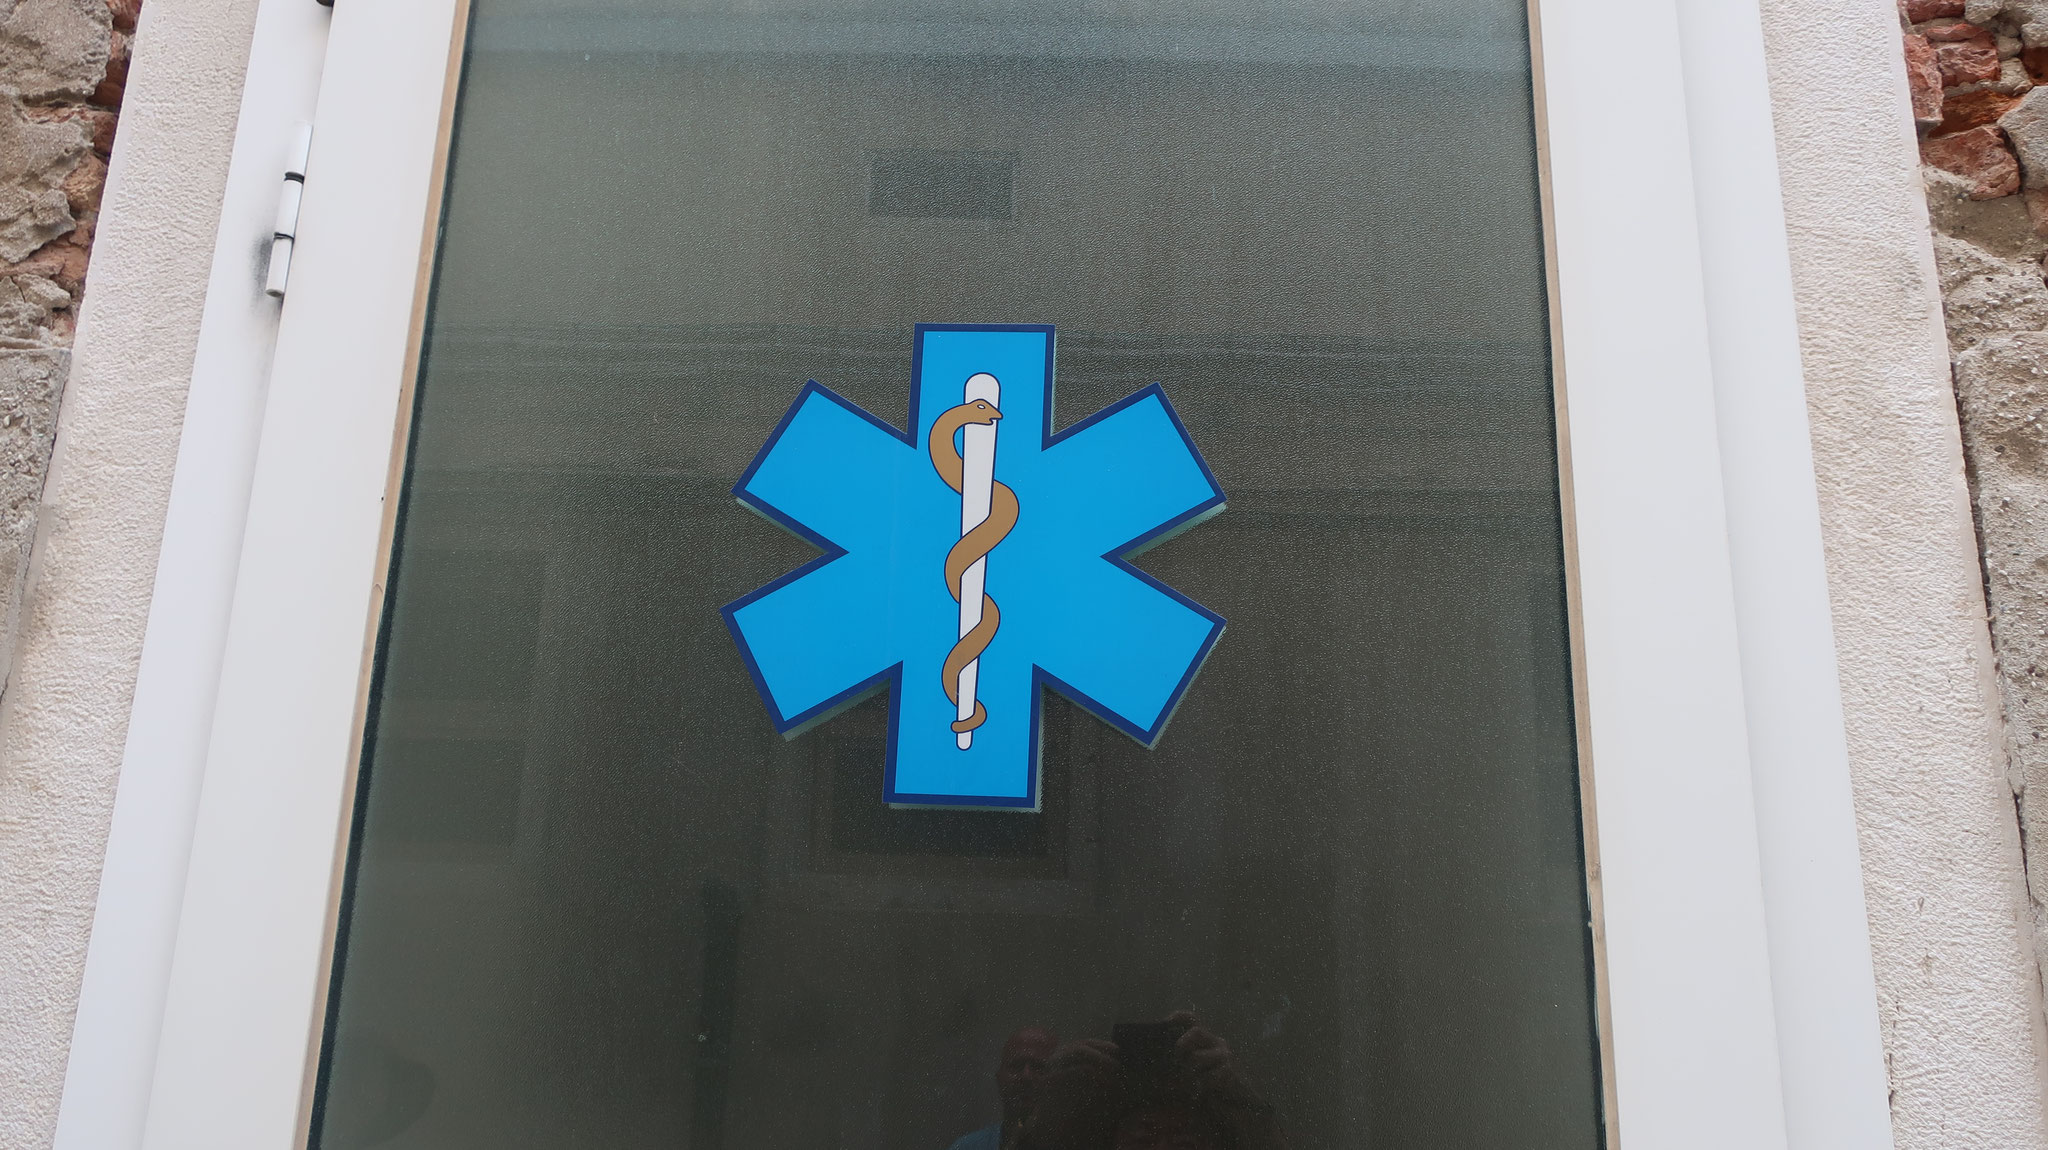 The rod of Asclepius at the door of the emergency department